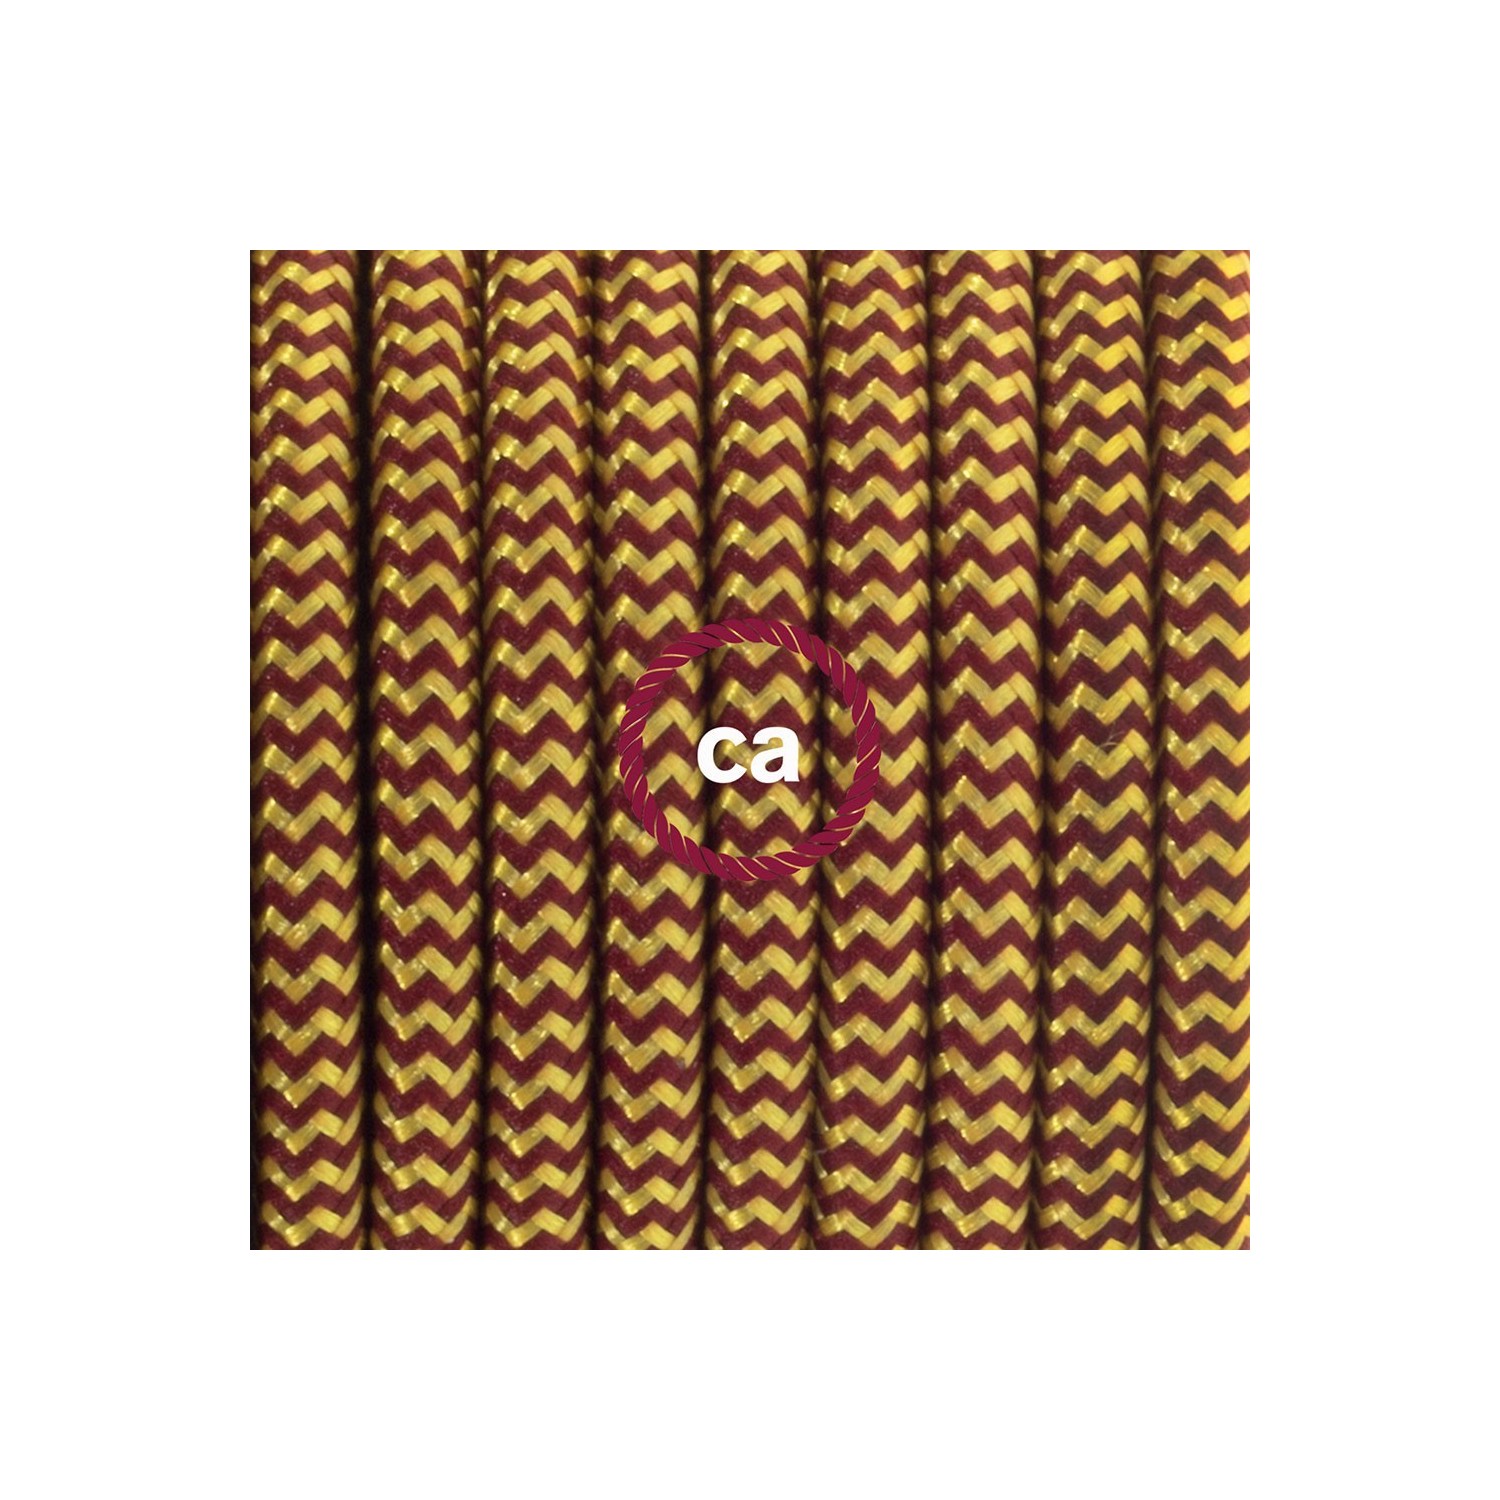 Pendant for lampshade, suspended lamp with ZigZag Gold and Burgundy Rayon textile cable RZ23